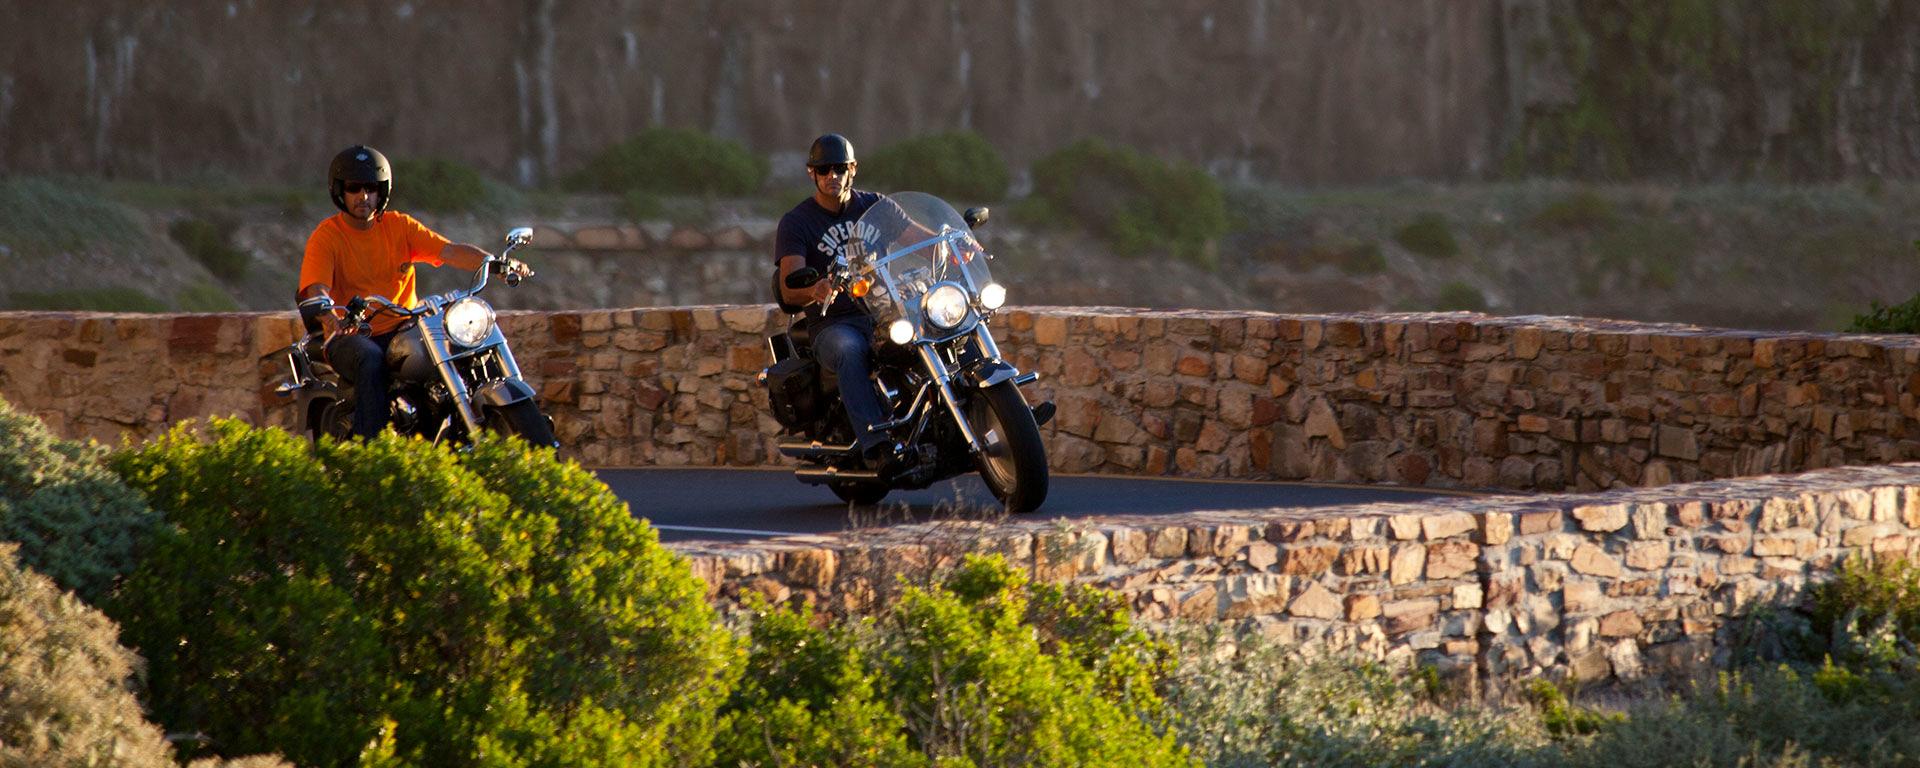 Top 5 Motorcycle Routes In Africa – Get Ready For An Adventure!